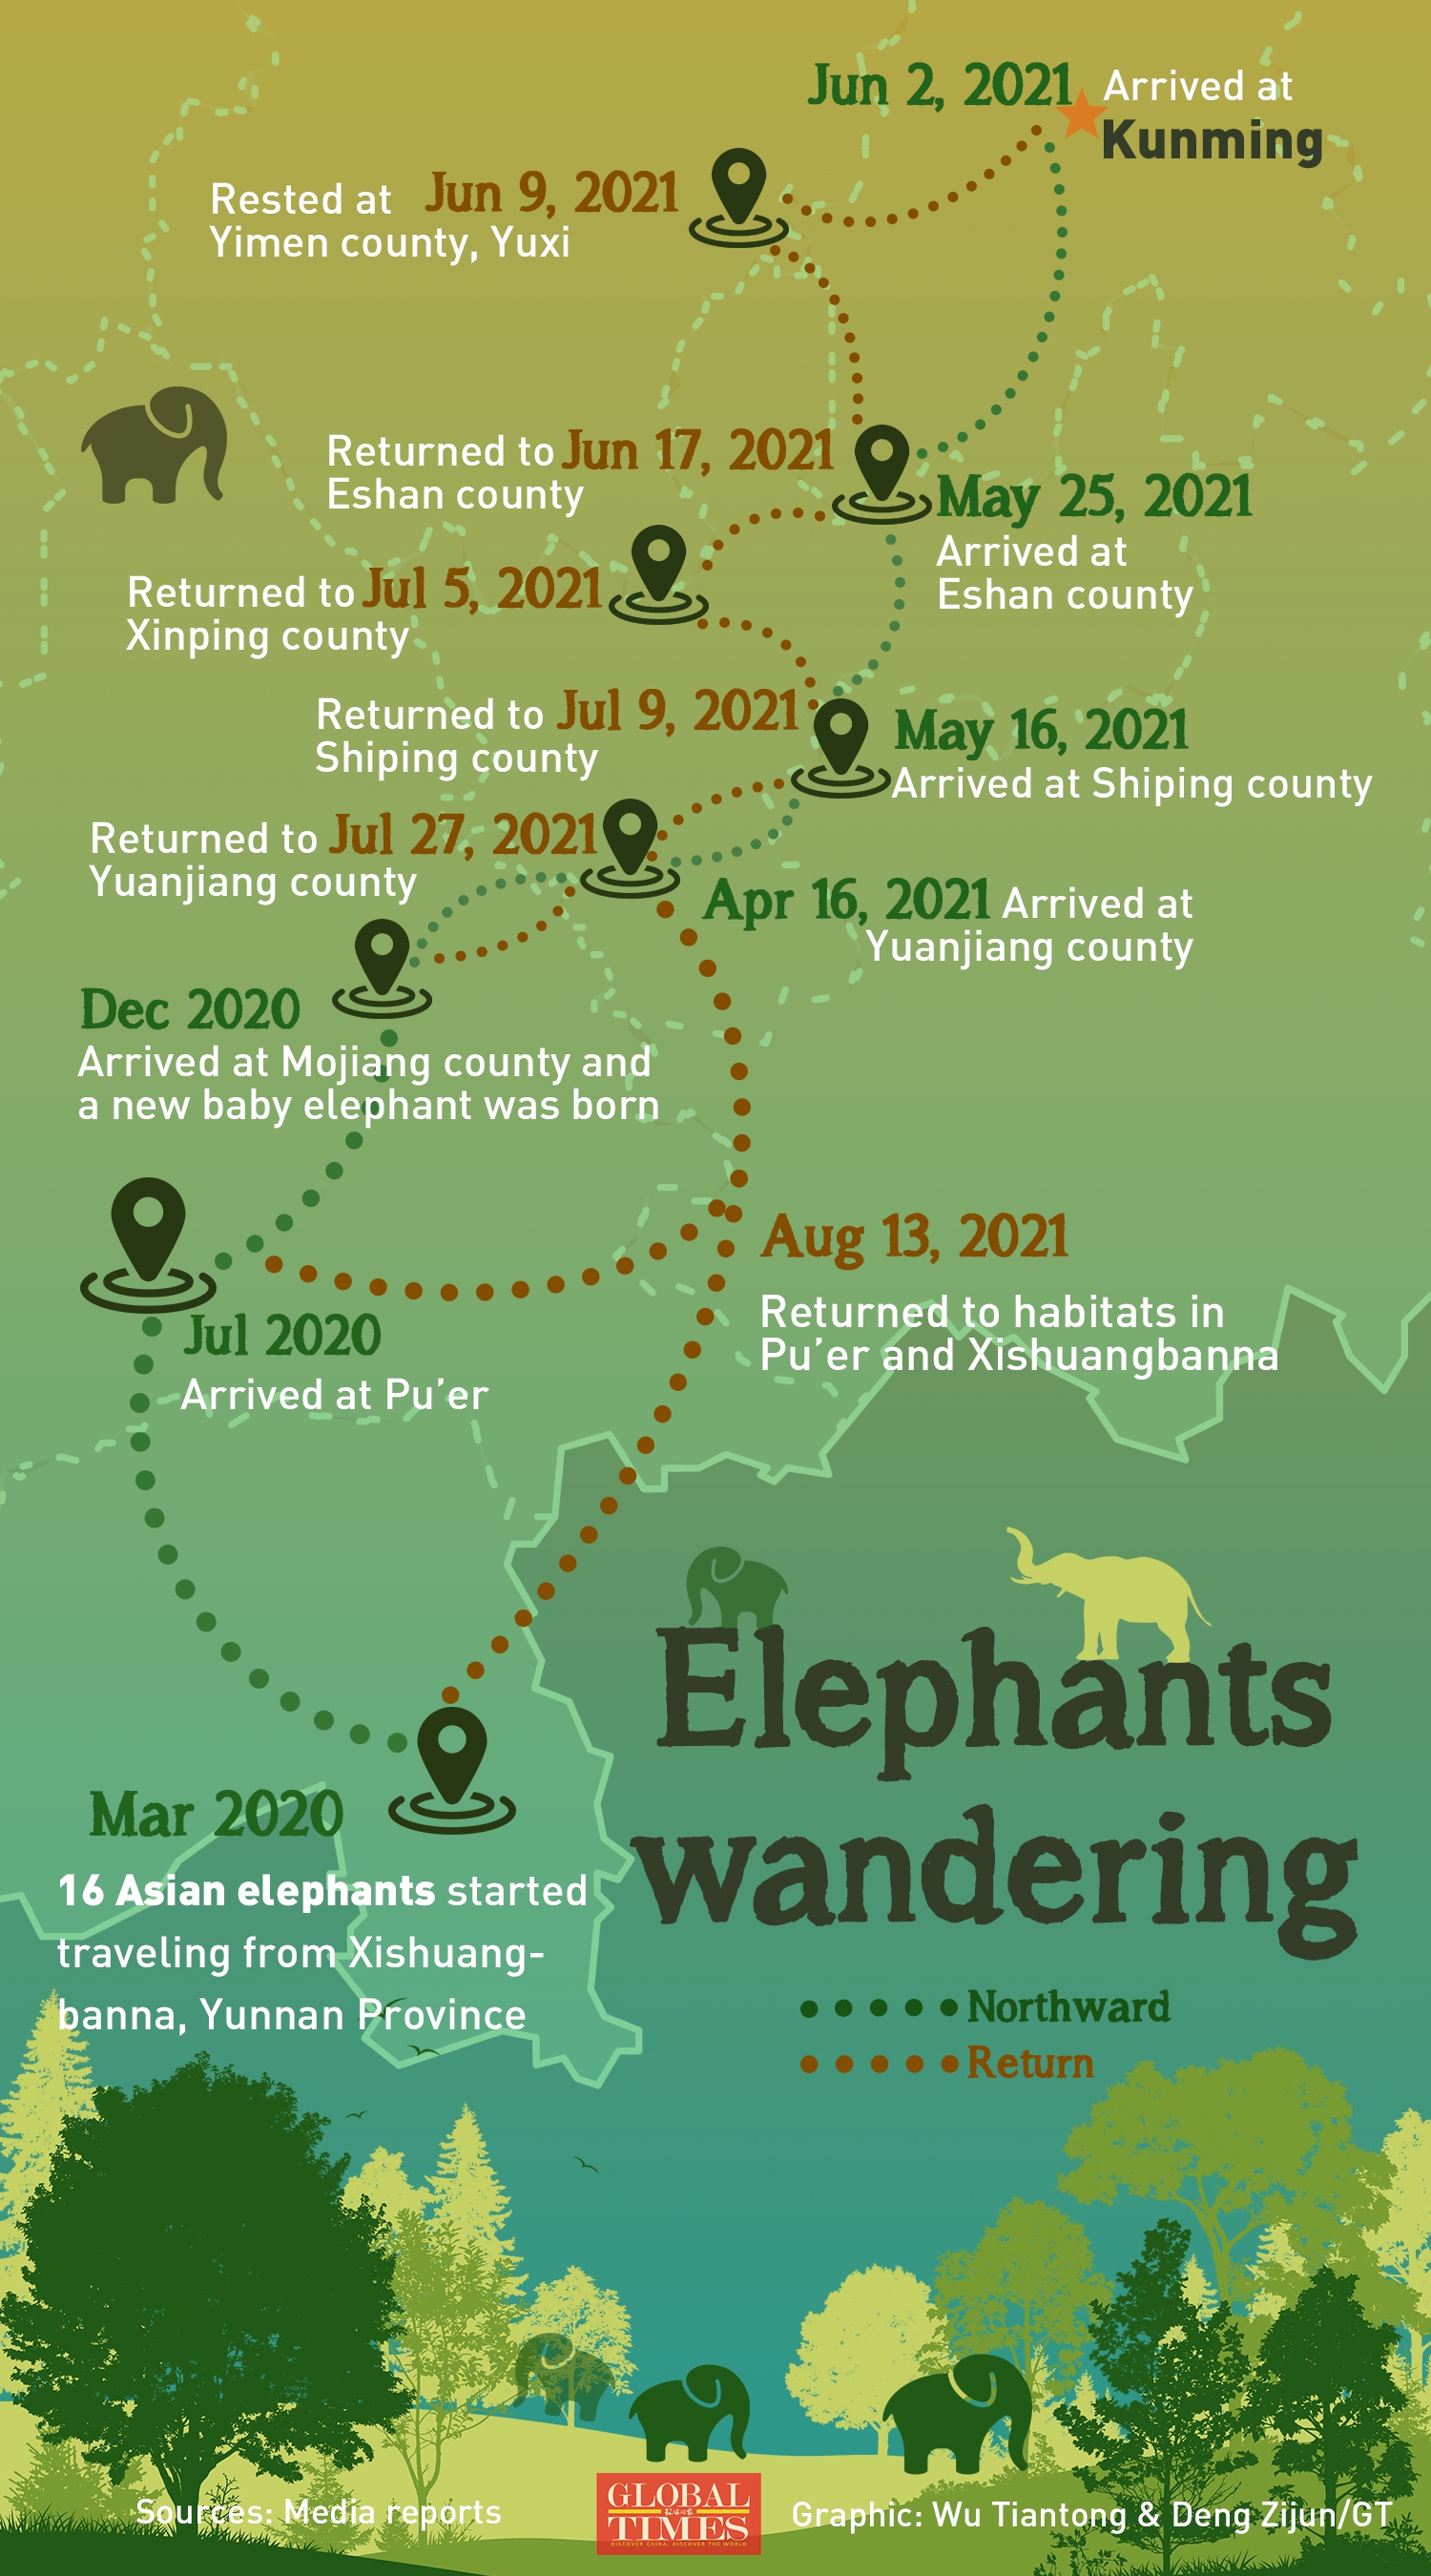 The 16 Asian elephants that started their northward journey in March 2020 from Xishuangbanna returned to their habitat in Xishuangbanna, Southwest China's Yunnan Province in August, spending hundreds of days and covering over 1,300 kilometers in their wandering. More than 25,000 people were deployed and 180 tons of elephant food were provided to ensure the safety of the elephants and local residents. 